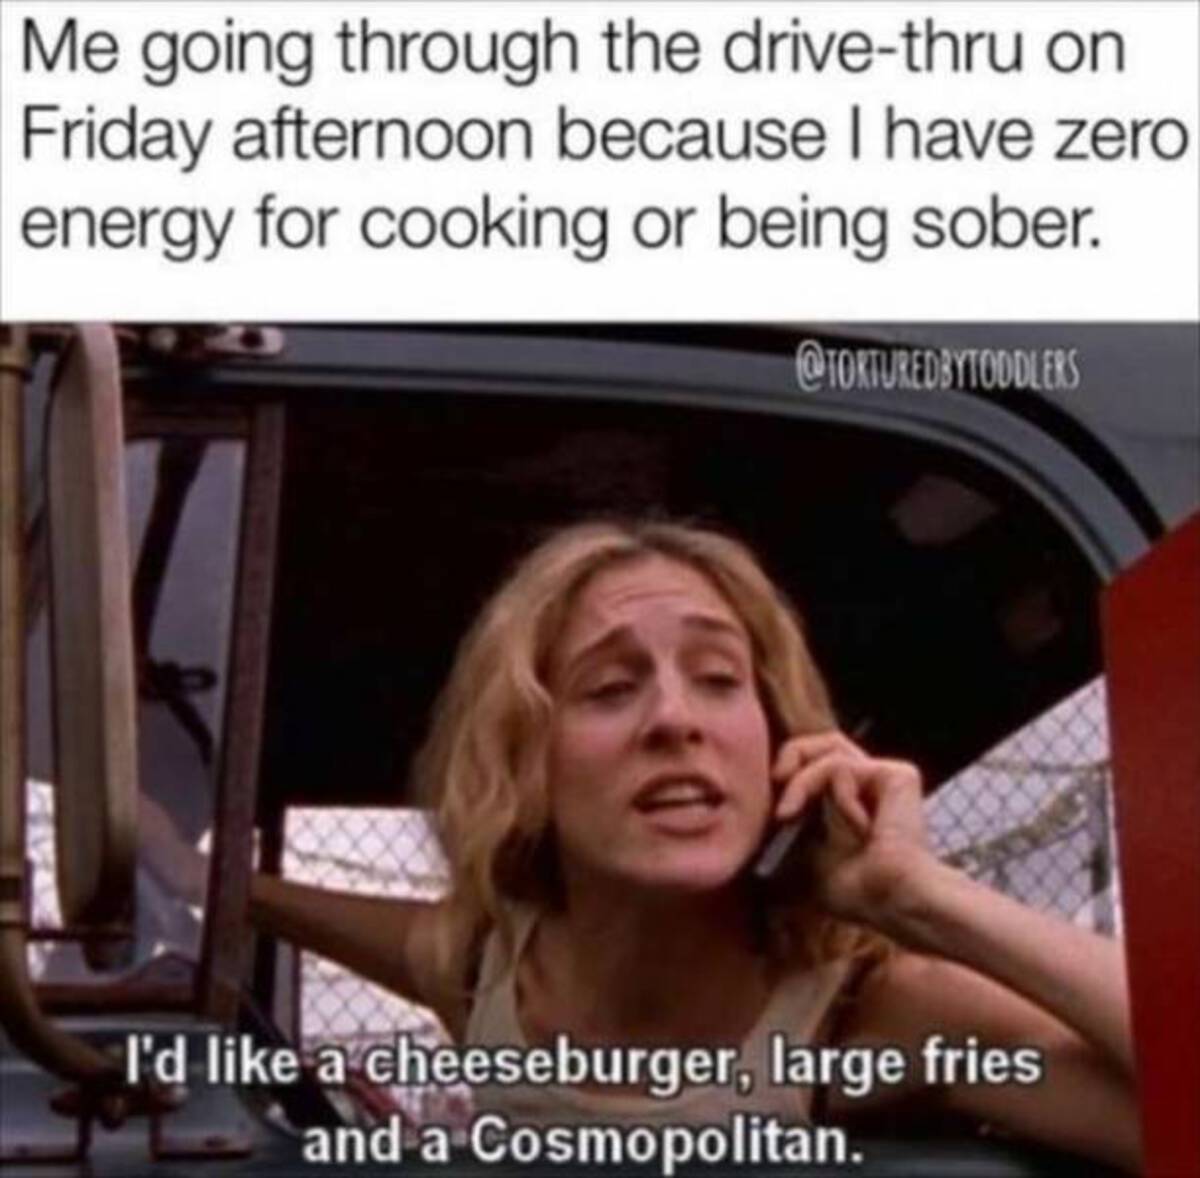 i d like a cheeseburger large fries - Me going through the drivethru on Friday afternoon because I have zero energy for cooking or being sober. I'd a cheeseburger, large fries and a Cosmopolitan.